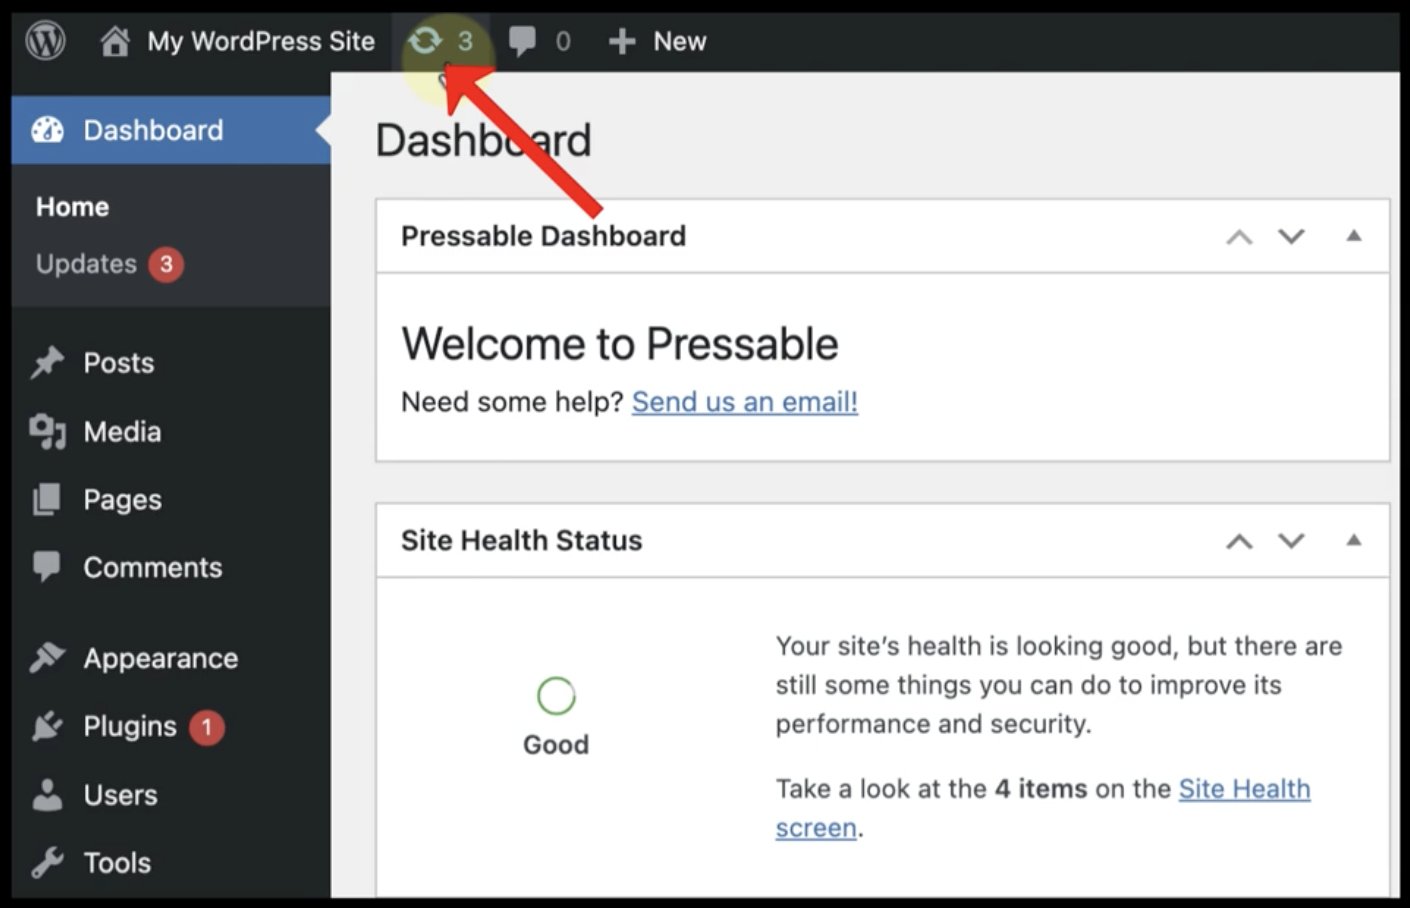 View of the WordPress admin dashboard with an icon indicating that three updates are available.